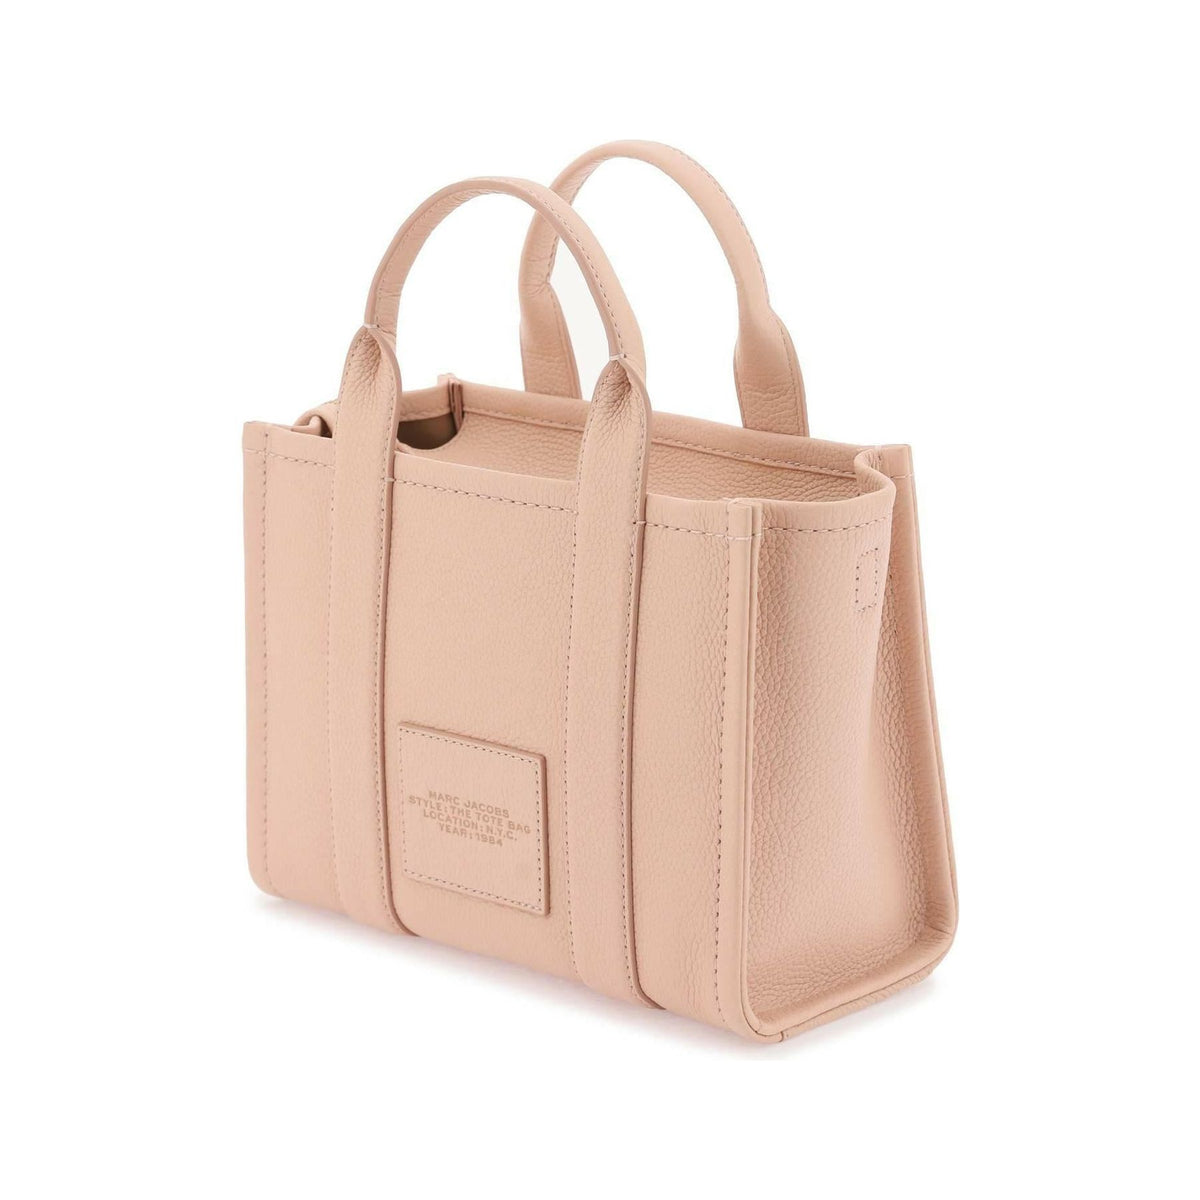 MARC JACOBS - Rose The Leather Small Tote Bag - JOHN JULIA